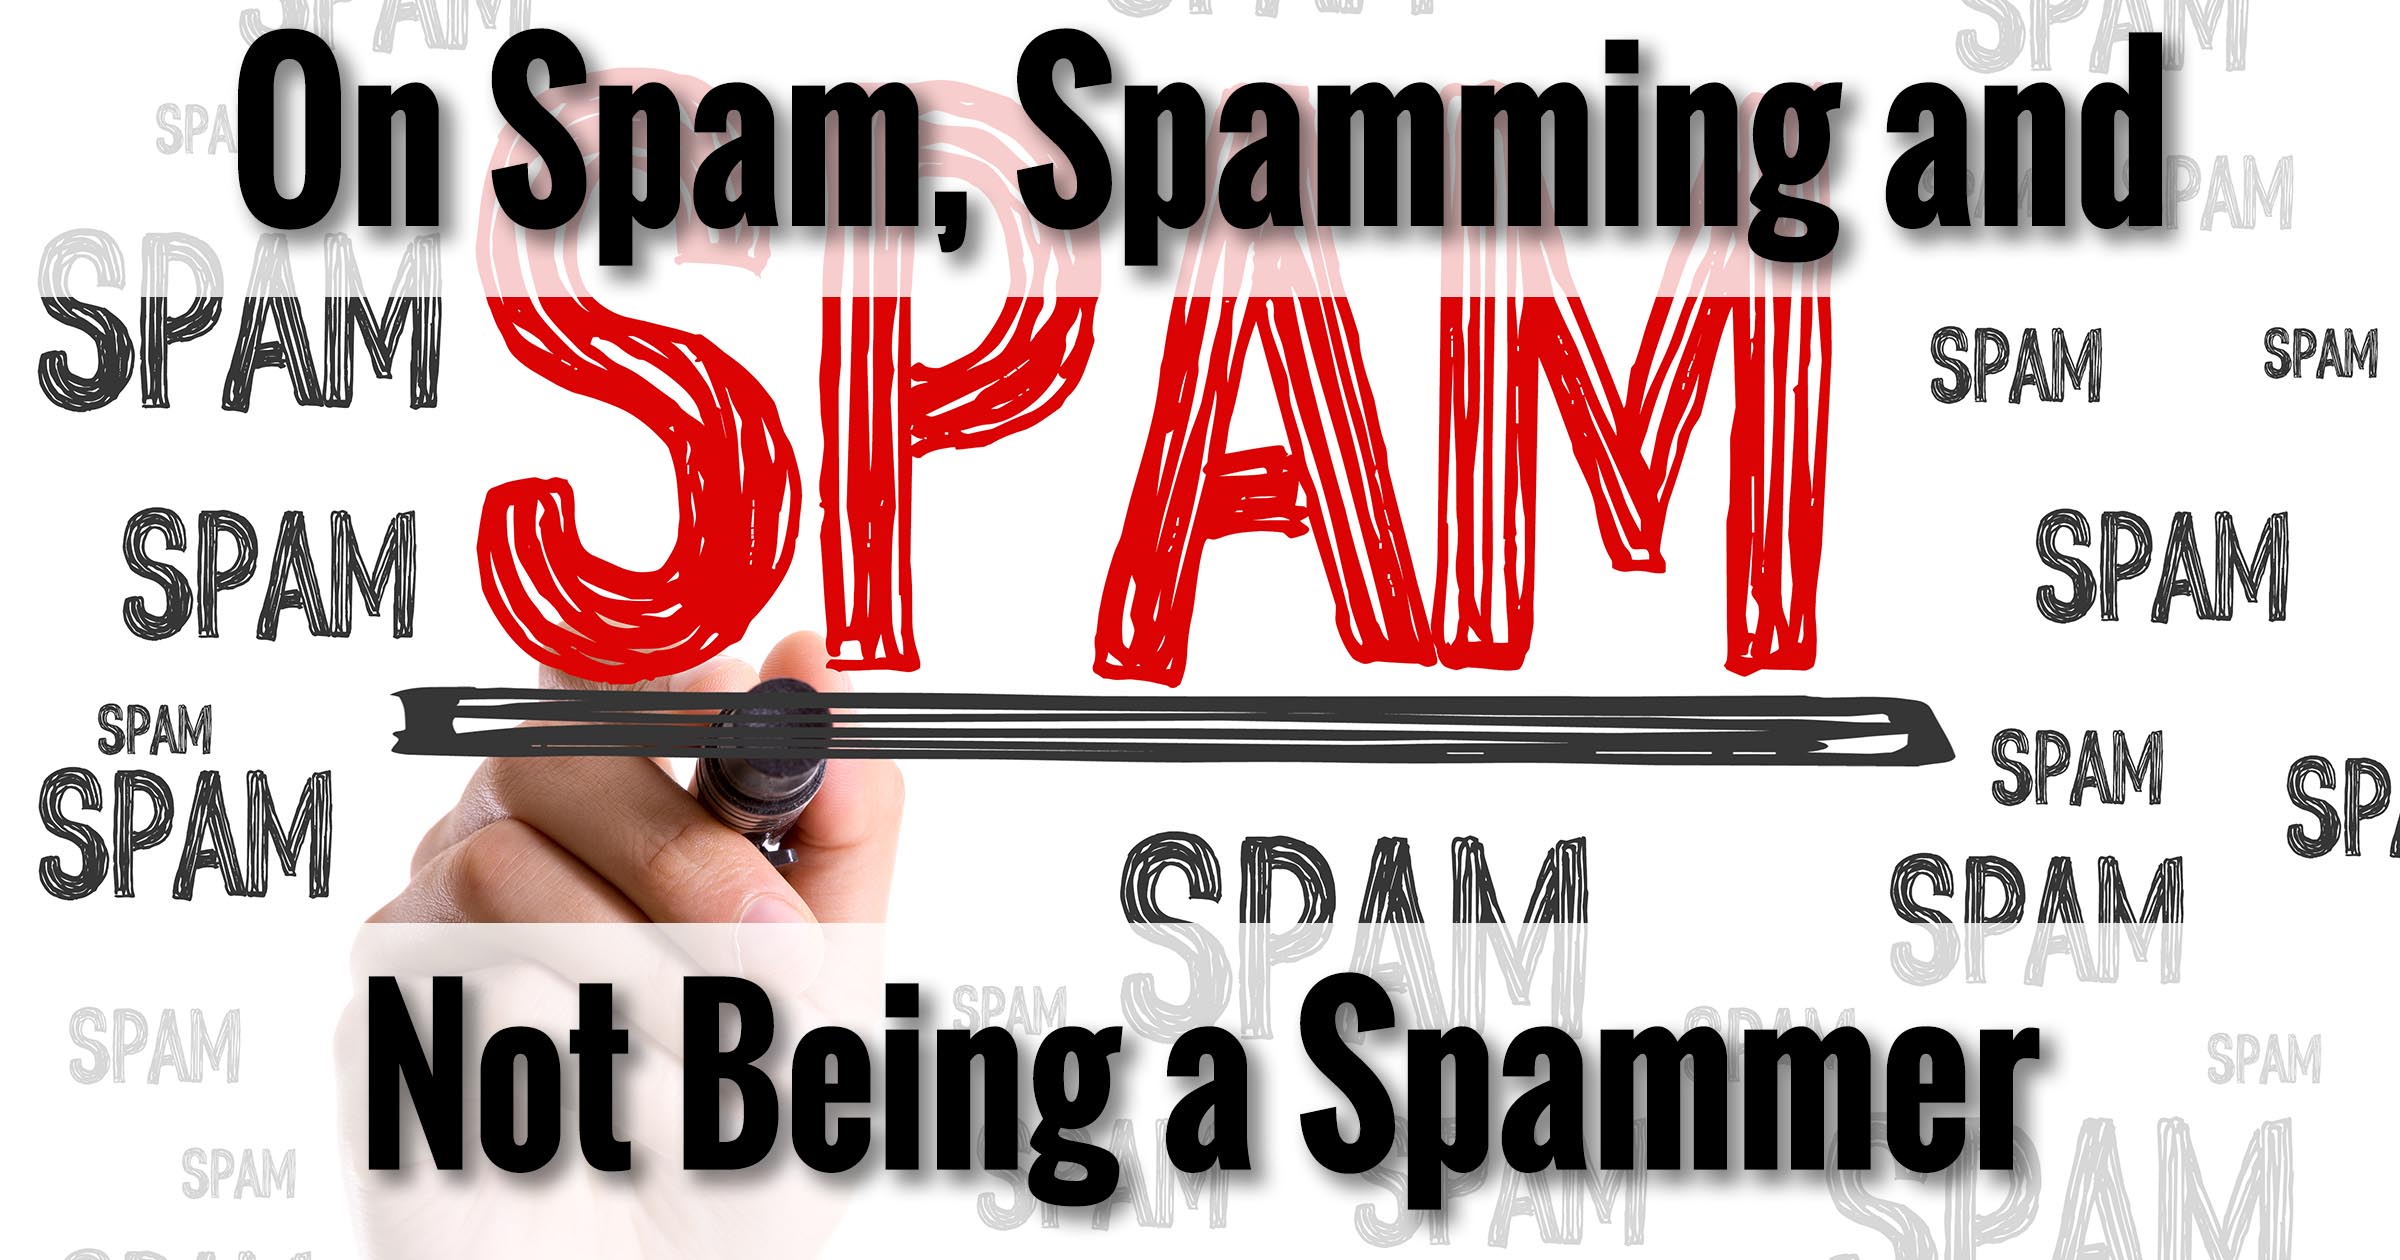 on-spam-spamming-and-not-being-a-spammer